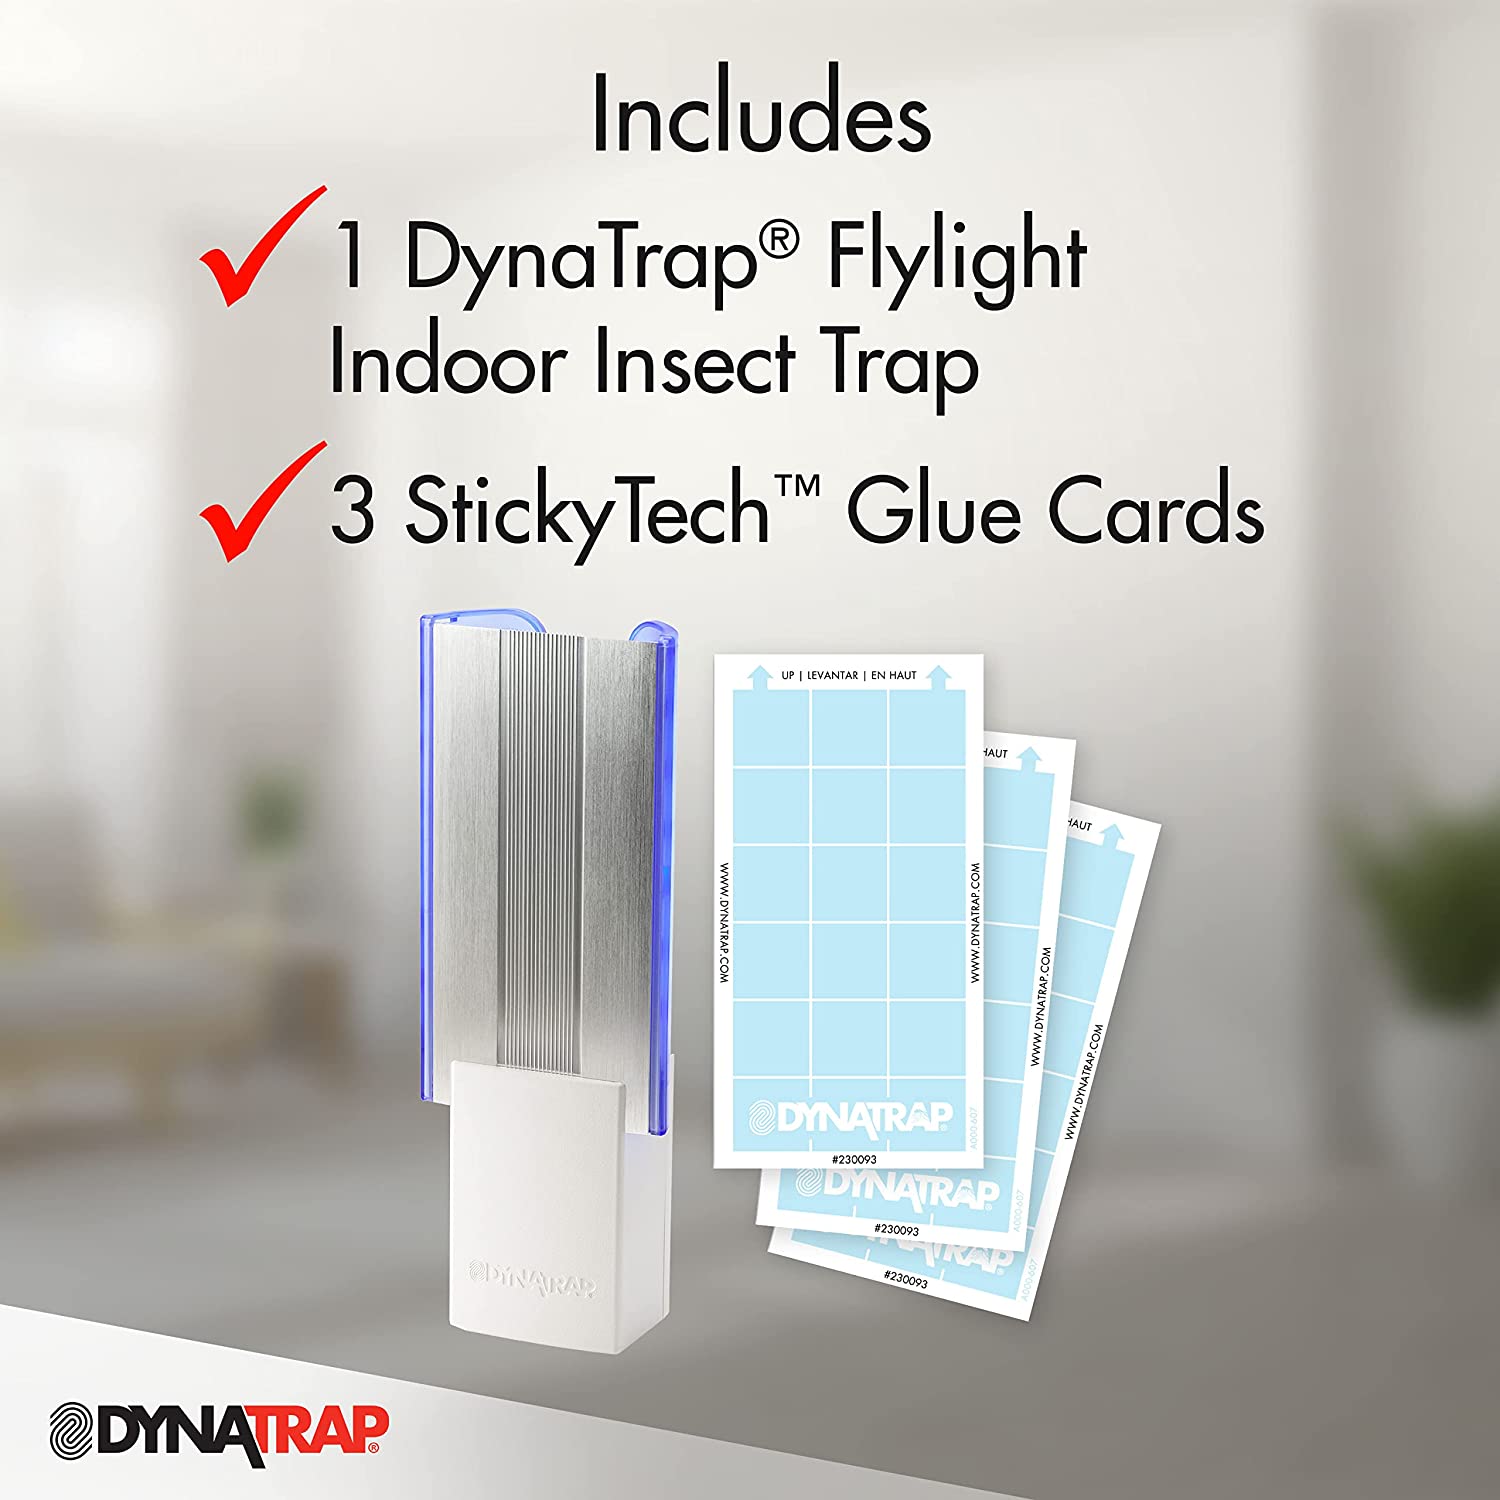 StickyTech Glue Boards for DynaTrap Indoor Insect Trap